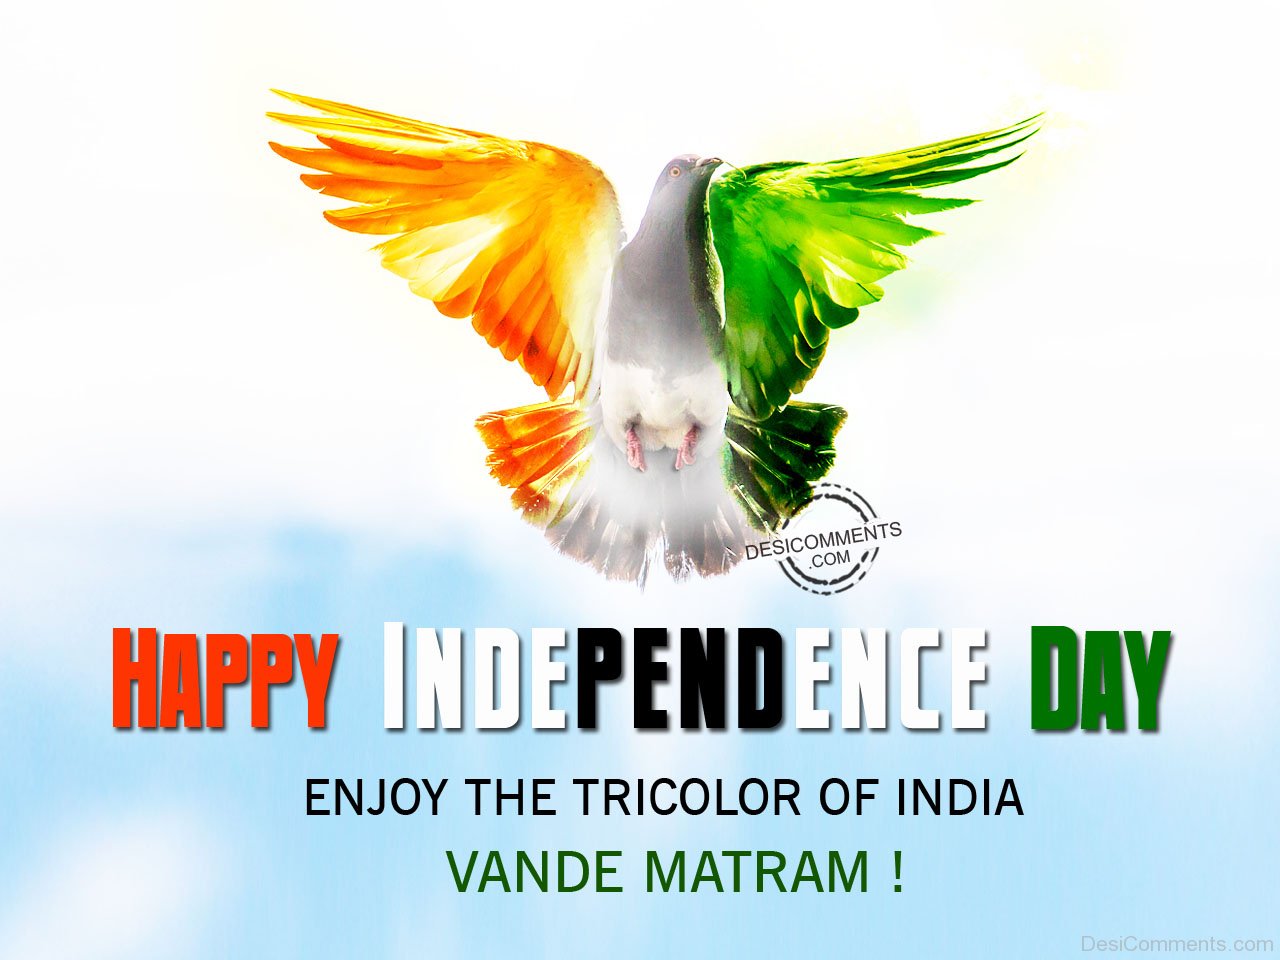 Enjoy the tricolor of india,Happy Independence Day - DesiComments.com